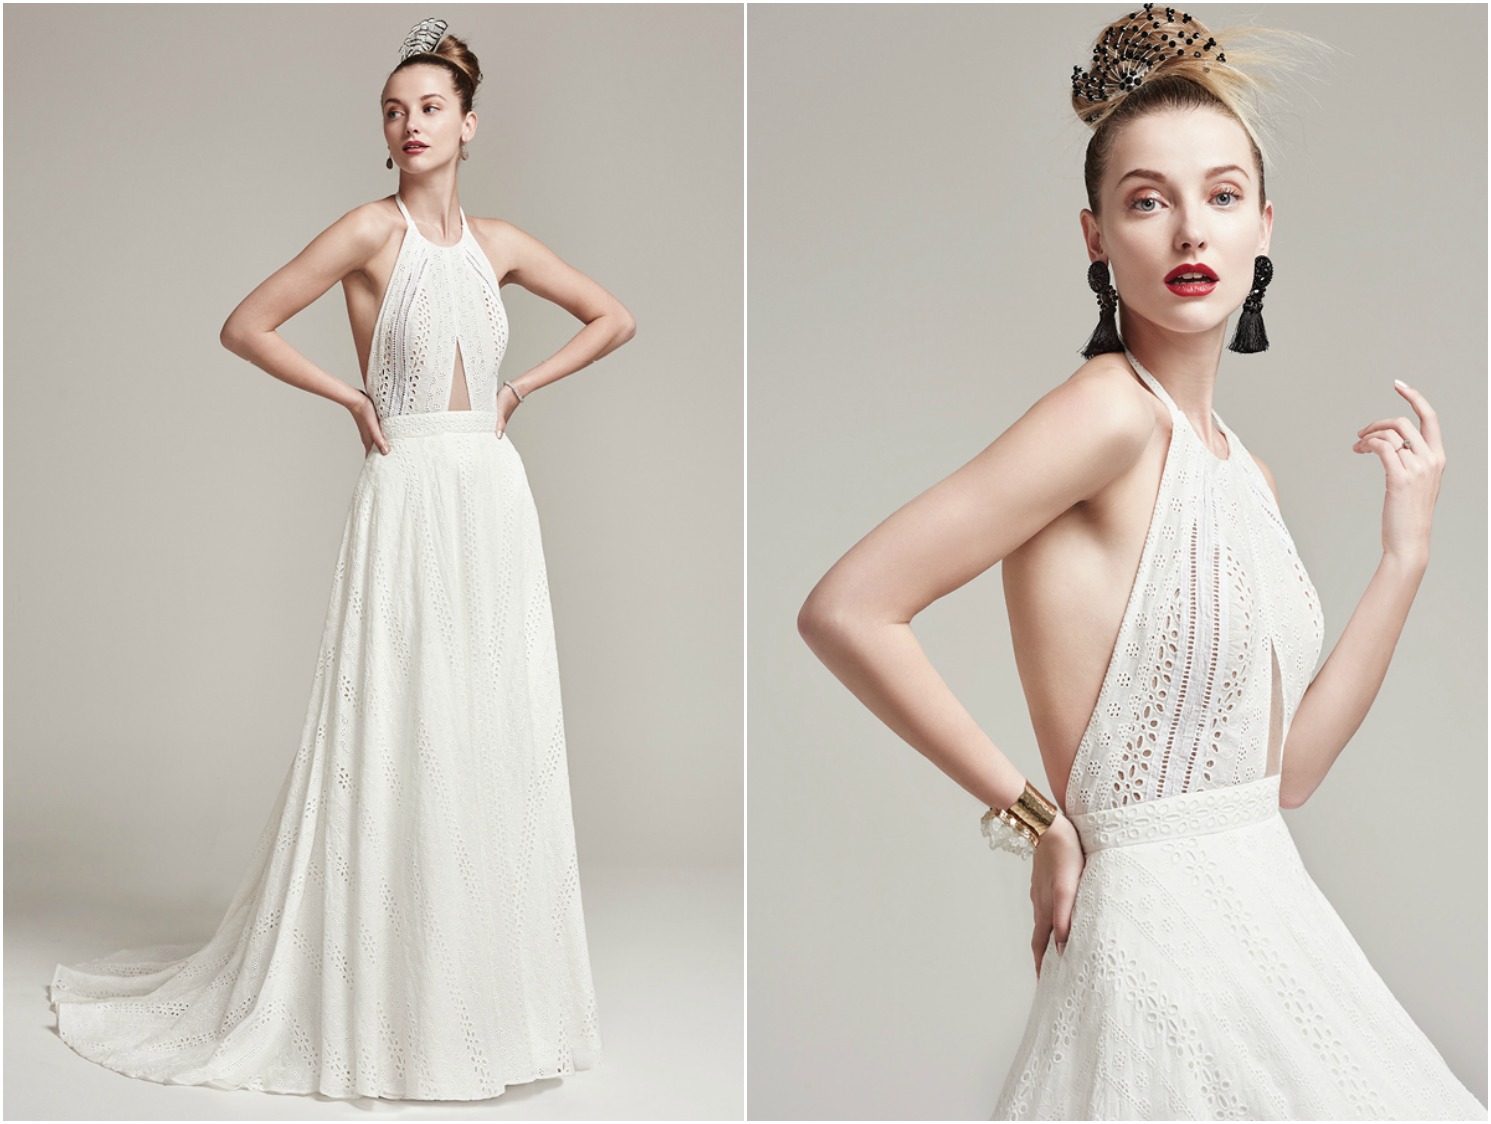 Exquisitely simple and unabashedly daring, this eyelet lace A-line wedding dress features a statement-making cut-out halter neckline complete with dramatic open back and sweeping train. Finished with covered buttons over zipper closure.

<a href="https://www.maggiesottero.com/sottero-and-midgley/nicole/9874" target="_blank">Sottero &amp; Midgley</a>